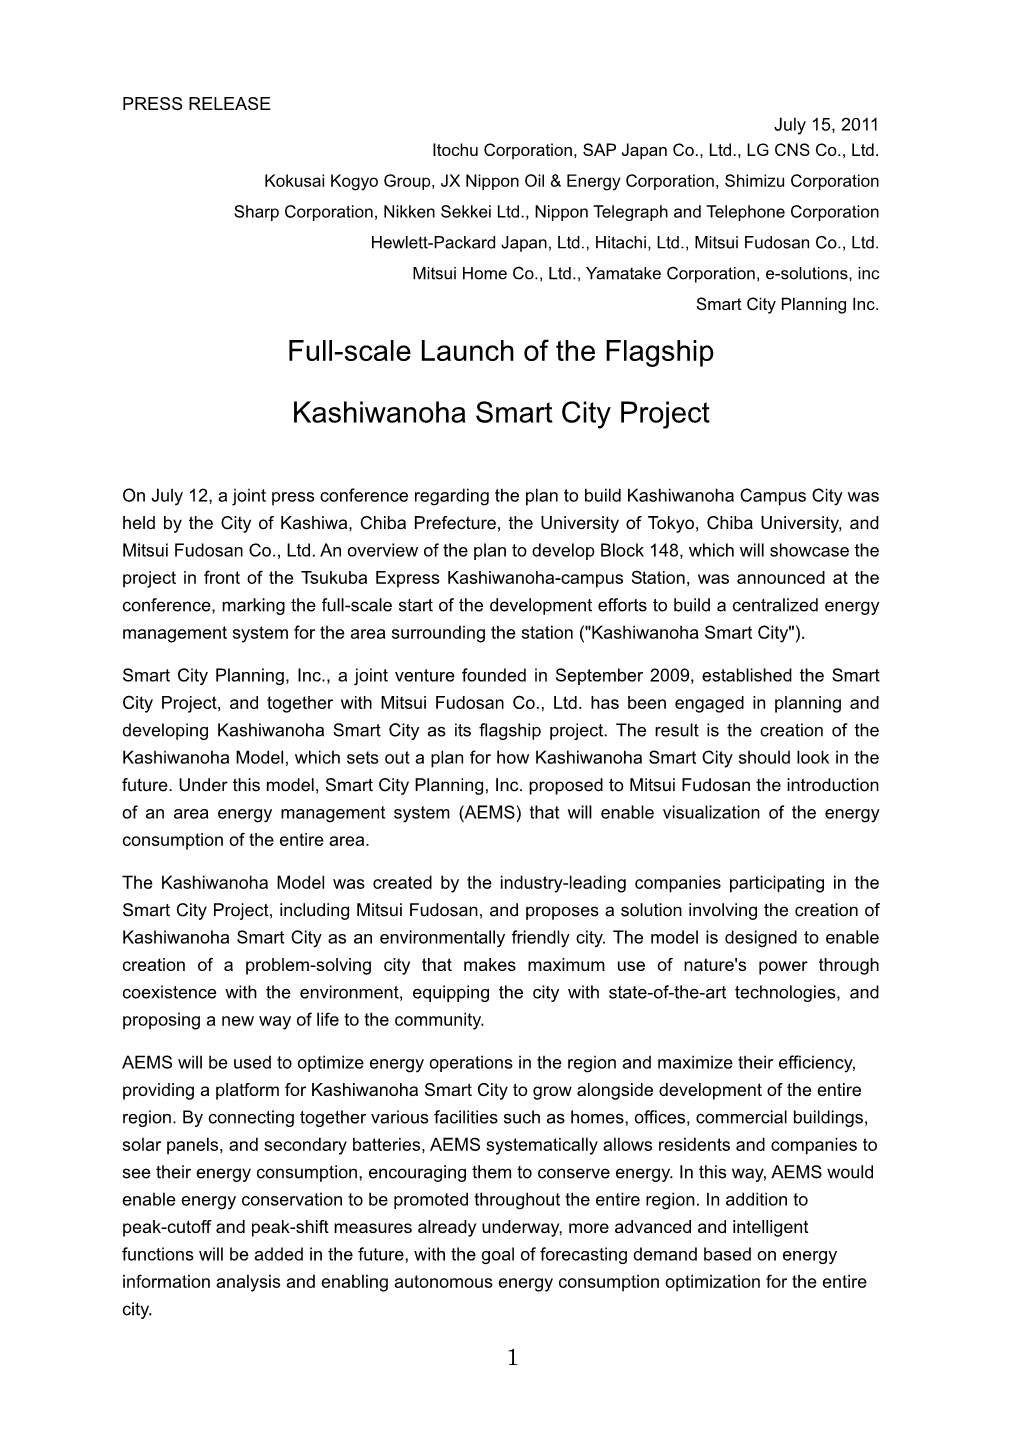 Full-Scale Launch of the Flagship Kashiwanoha Smart City Project